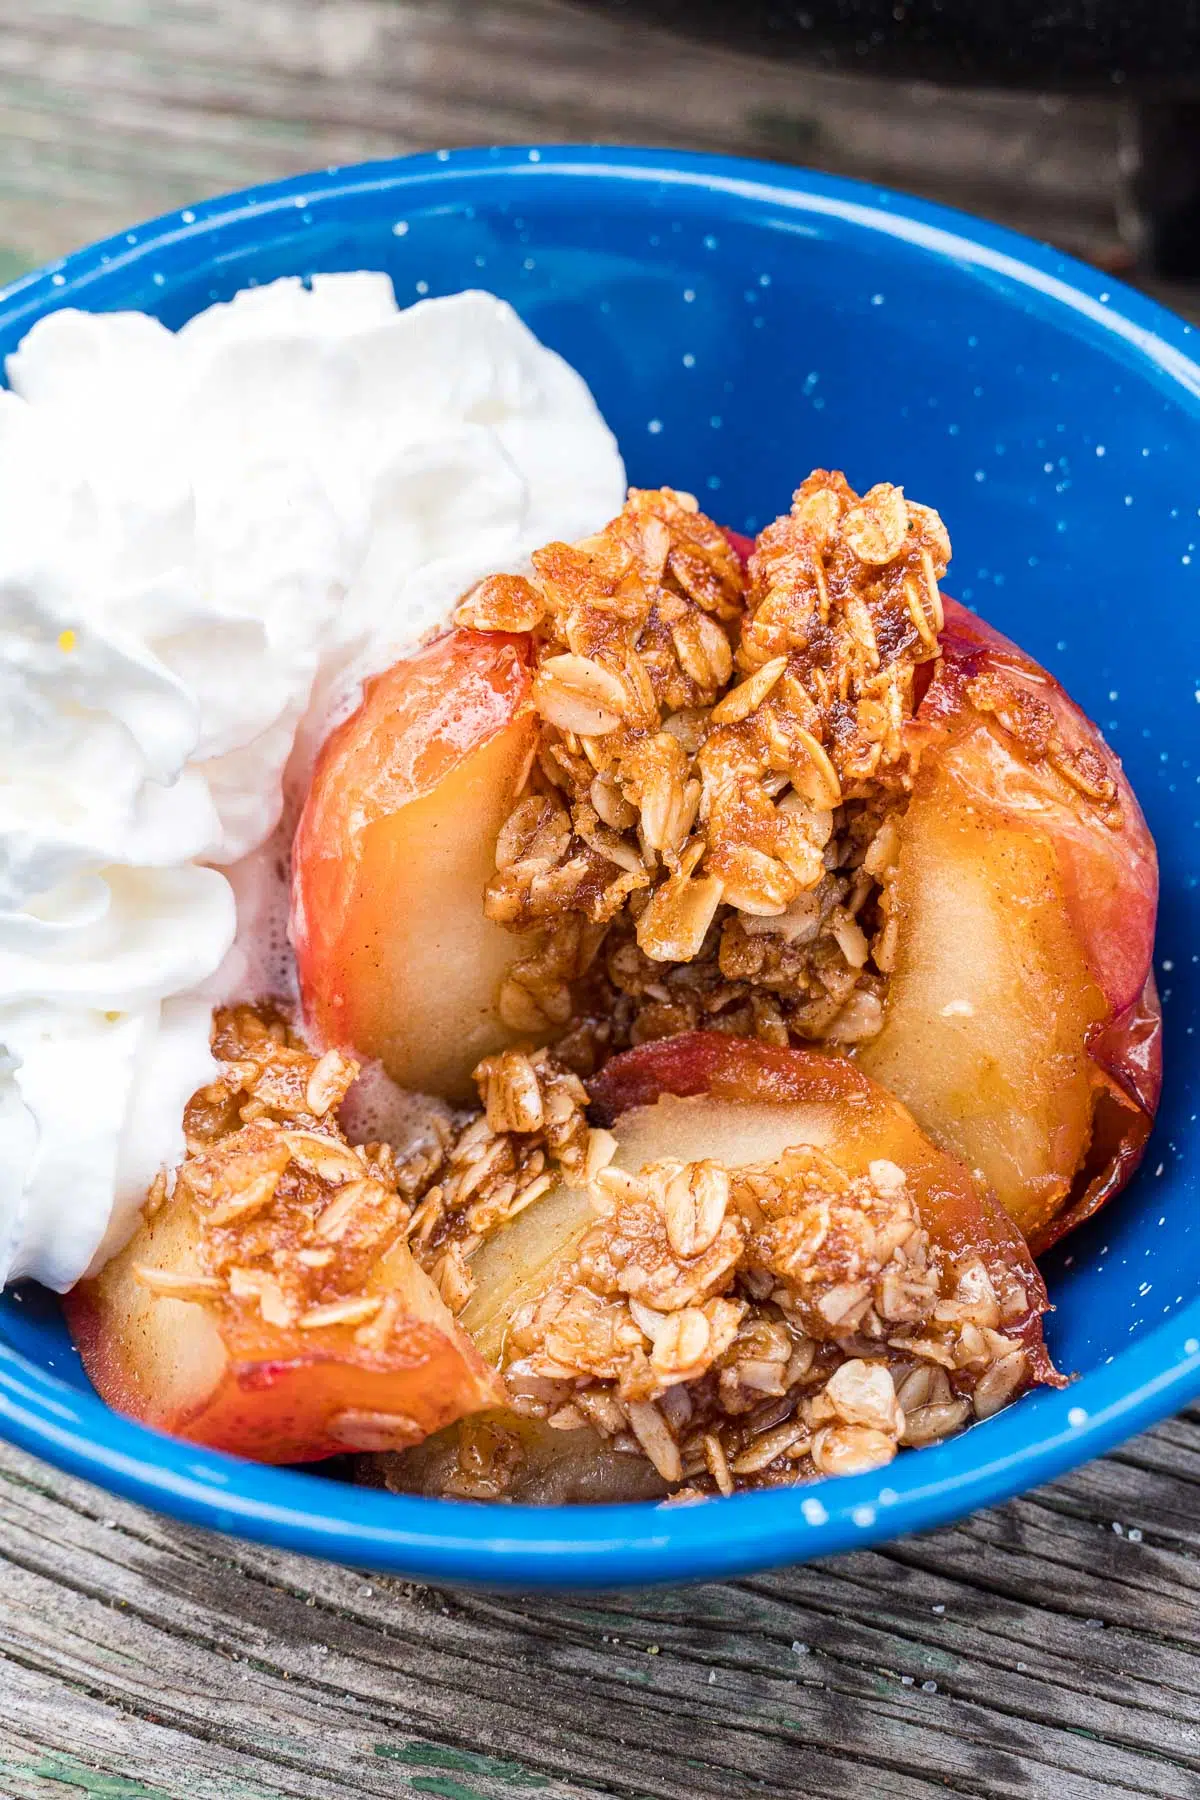 An apple filled with oats in a bowl with whipped cream.